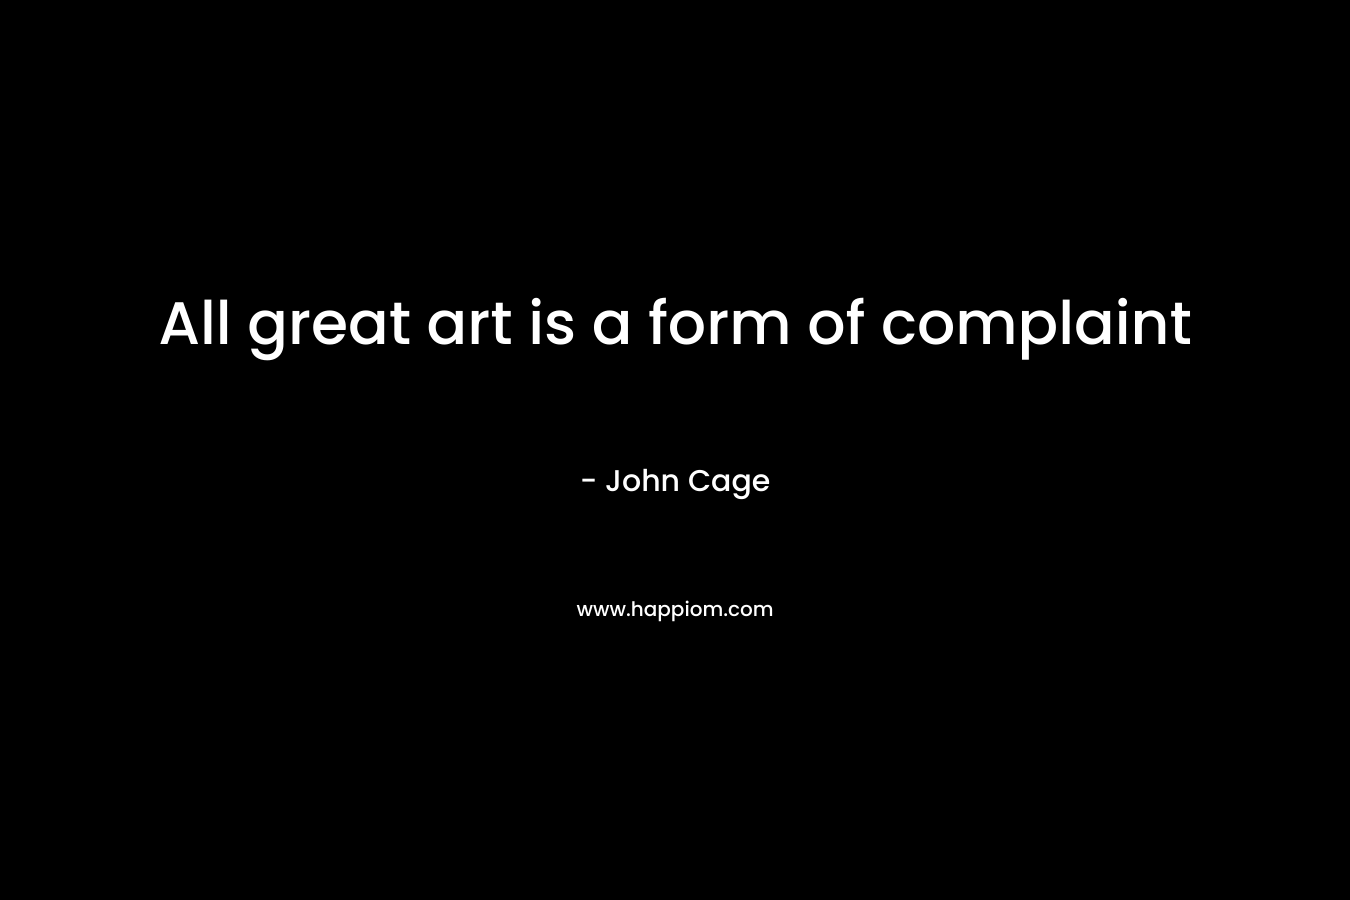 All great art is a form of complaint